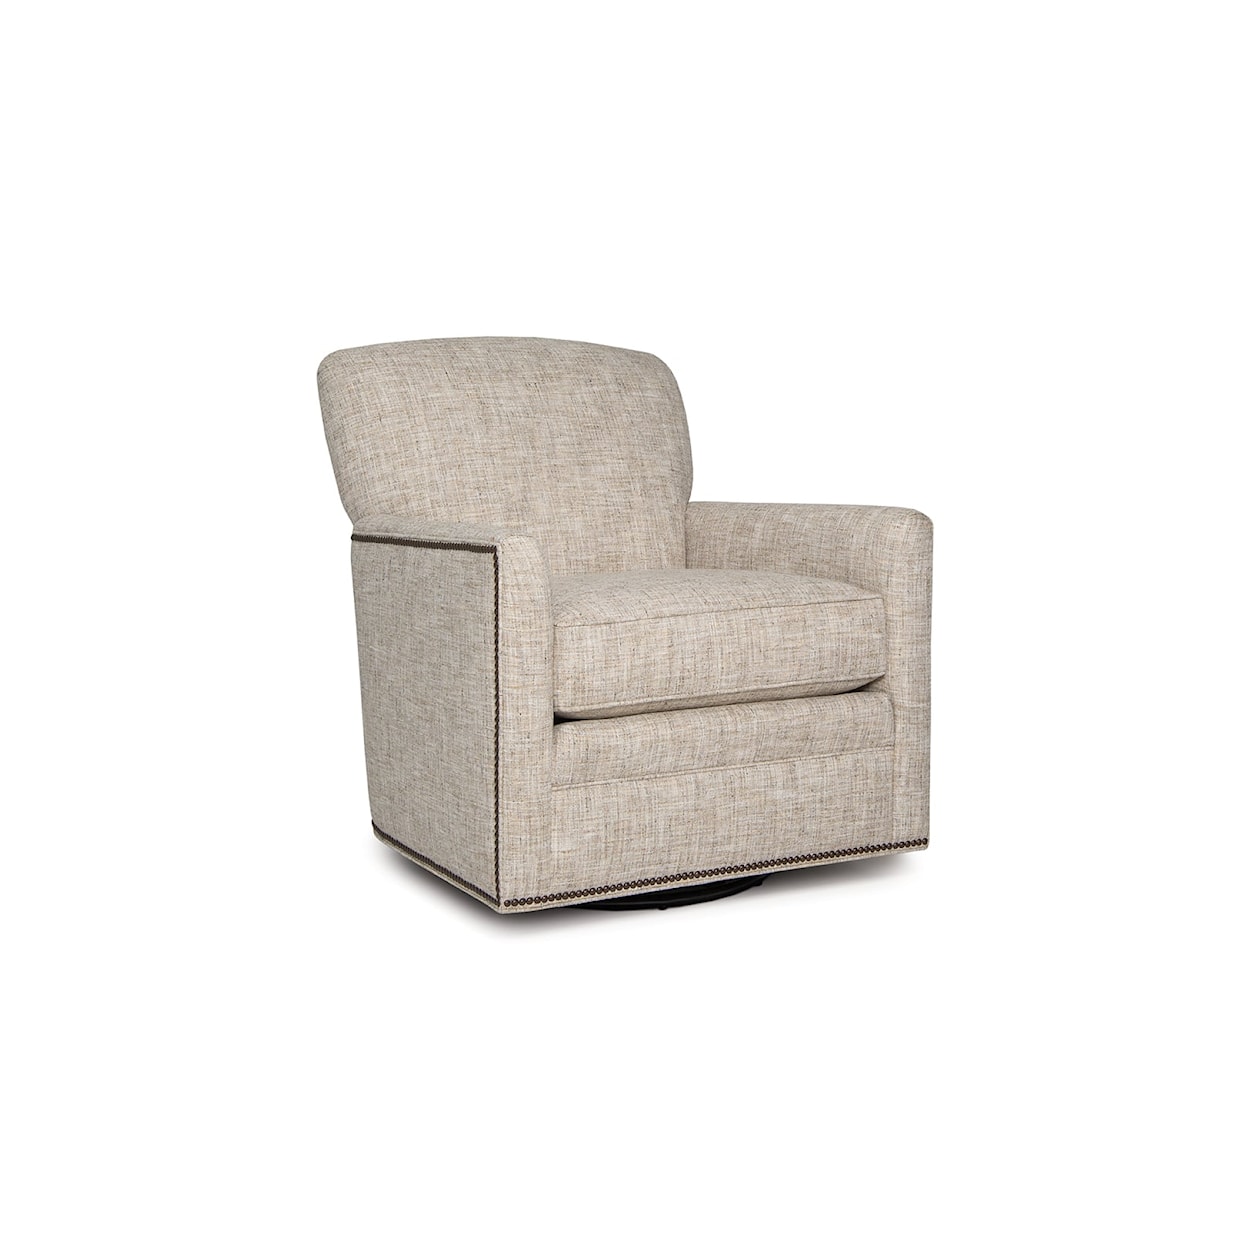 Smith Brothers 550 Swivel Glider Chair